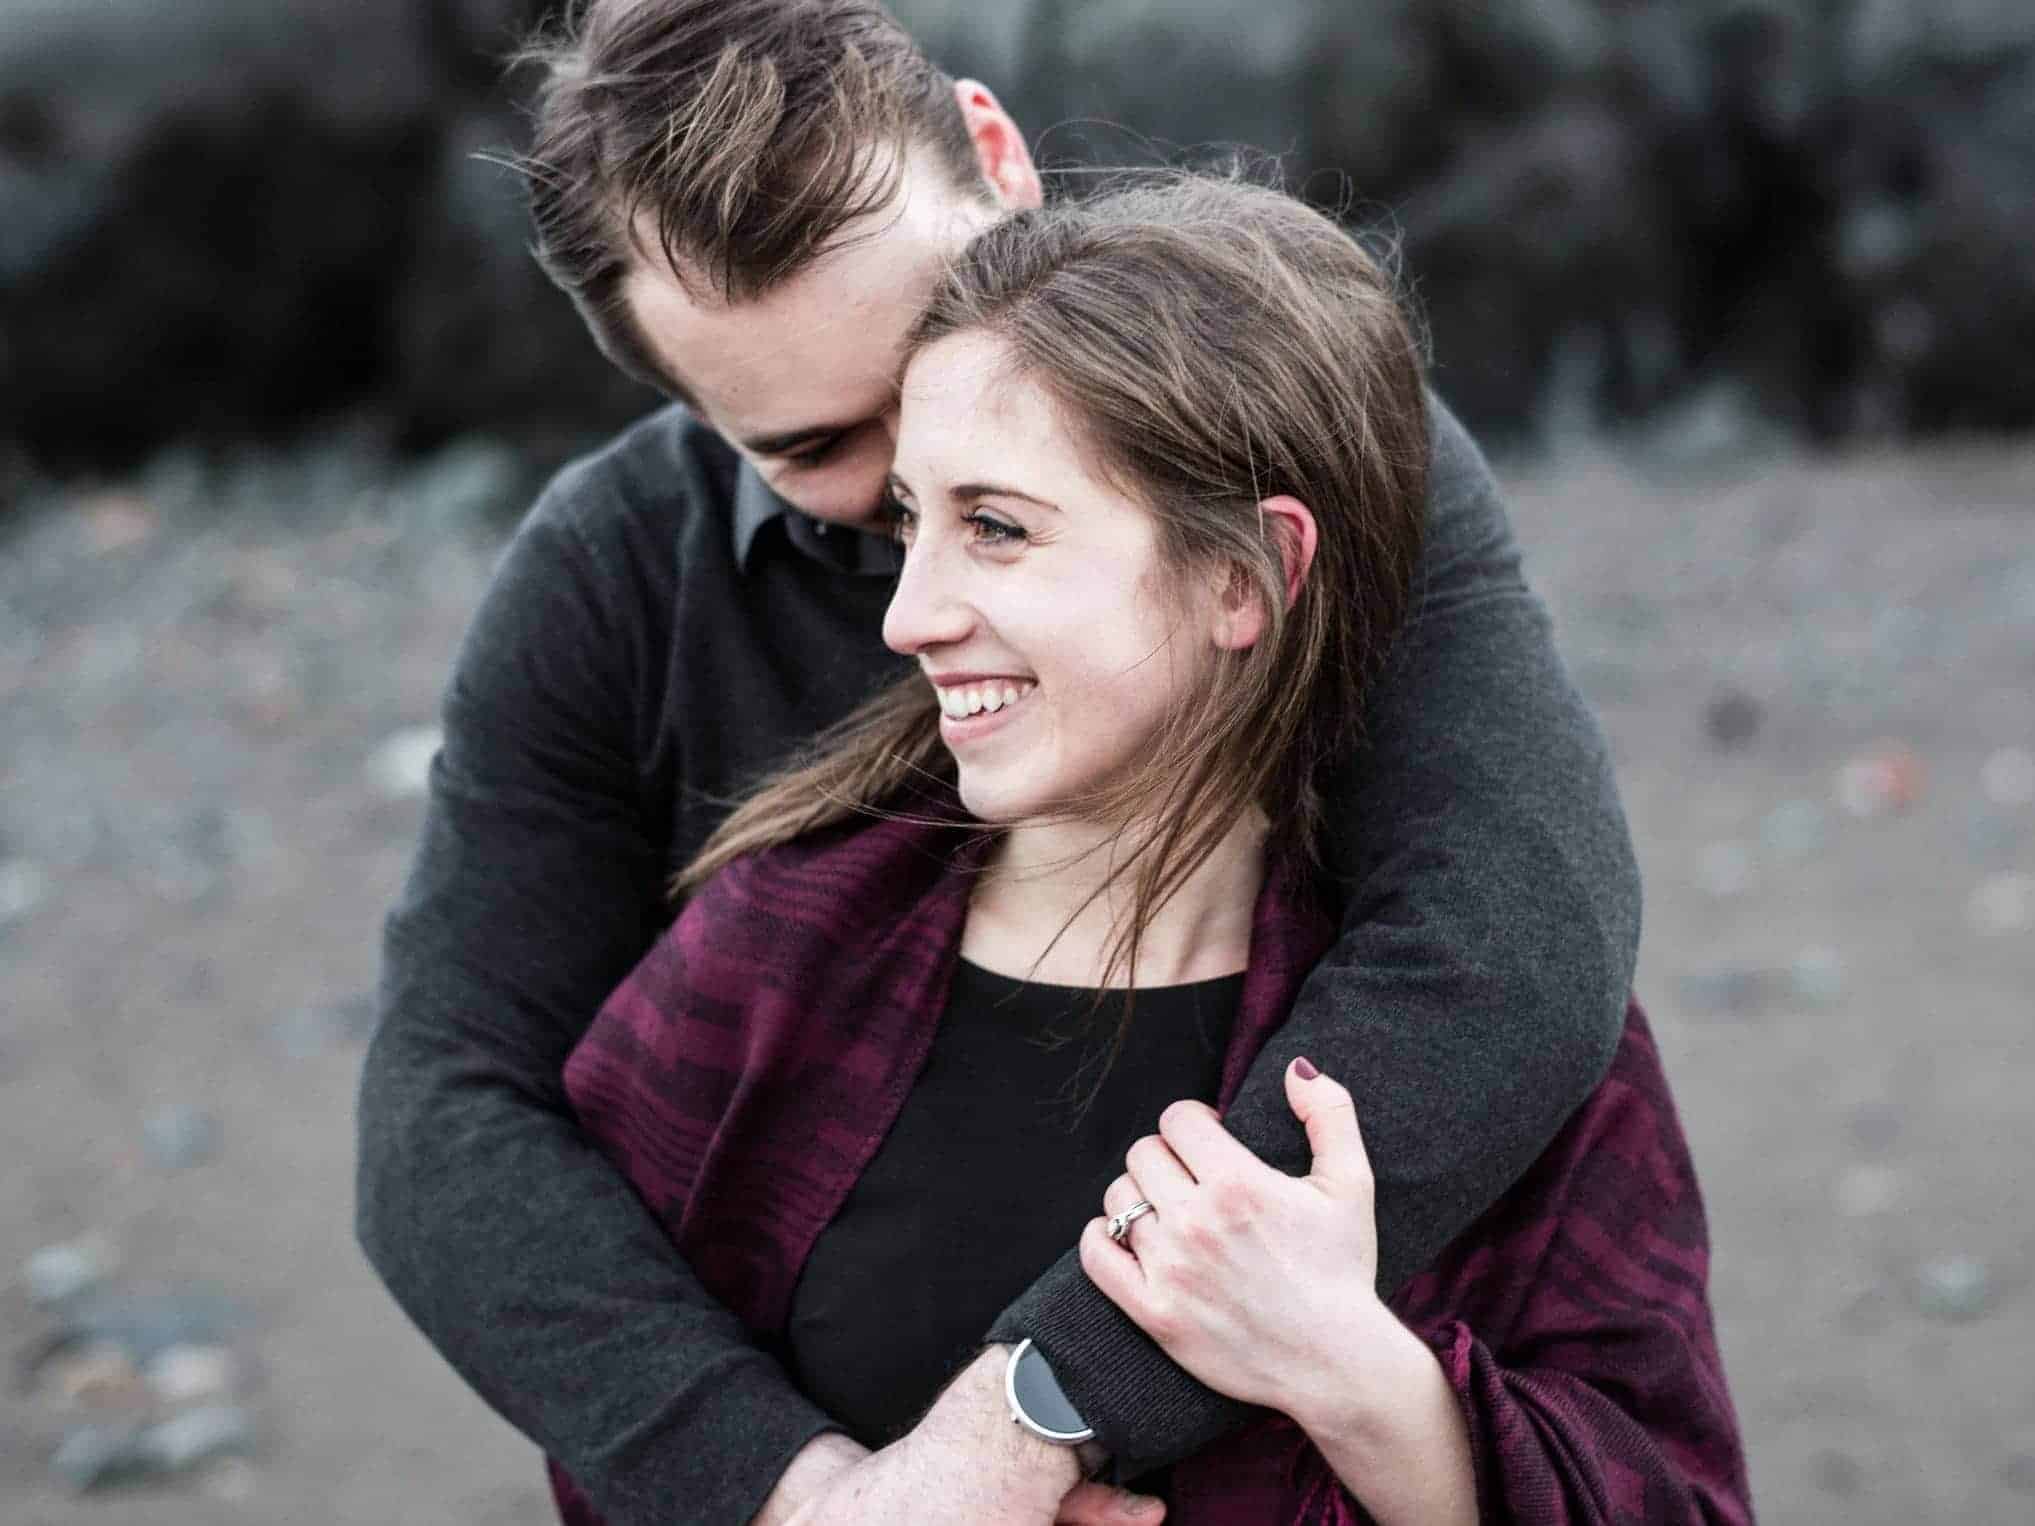 Our Engagement Photos - Part One